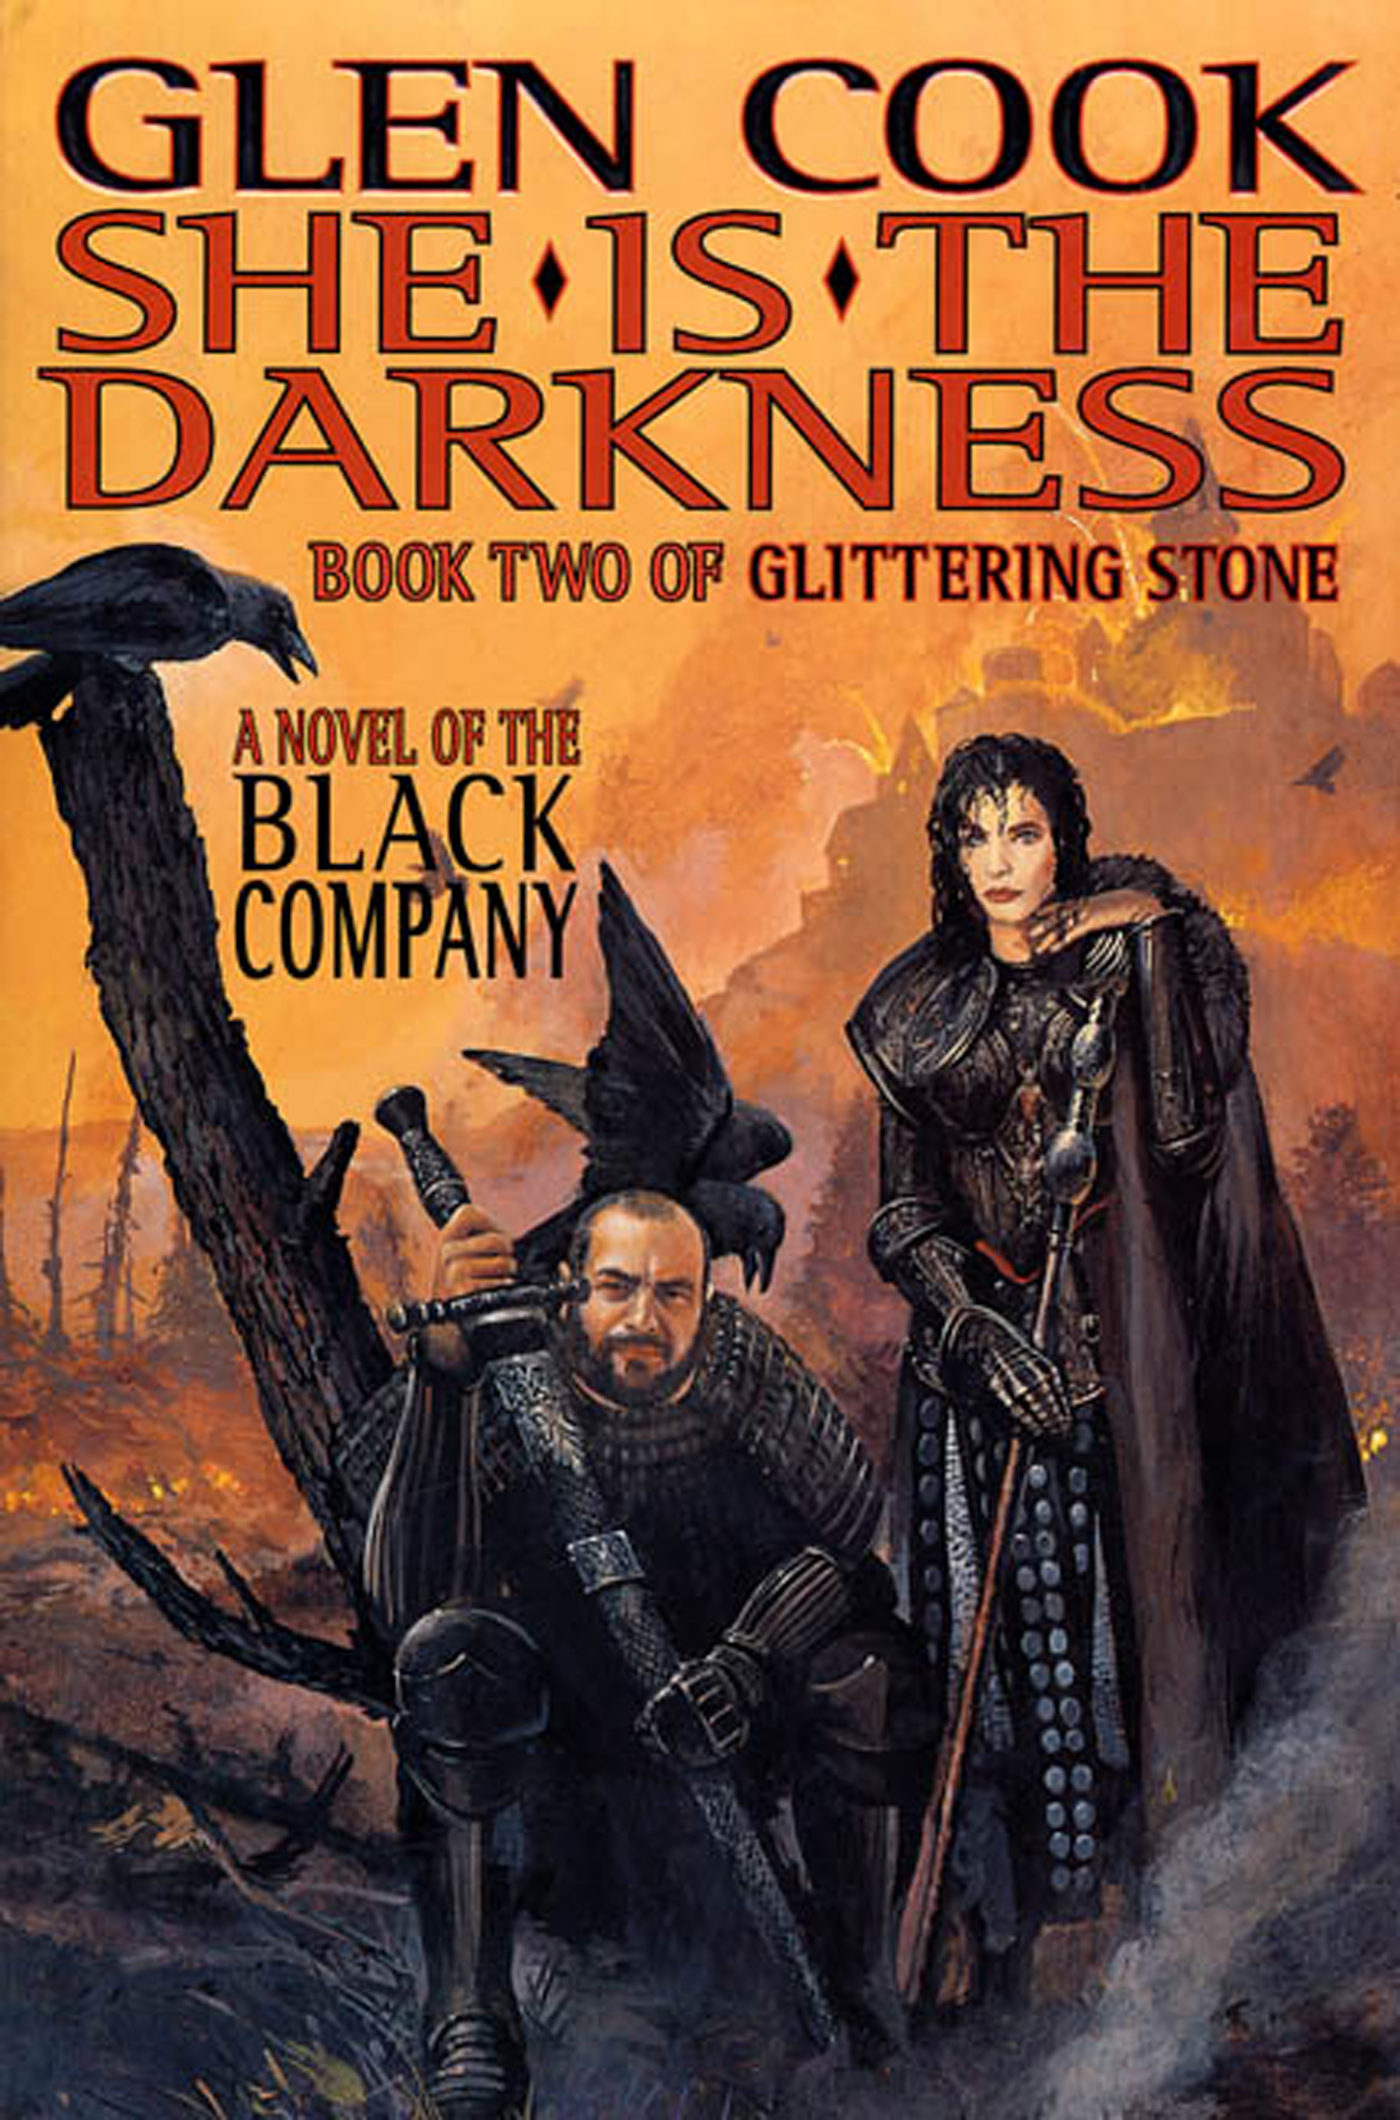 She Is The Darkness : Book Two of Glittering Stone: A Novel of the Black Company by Glen Cook